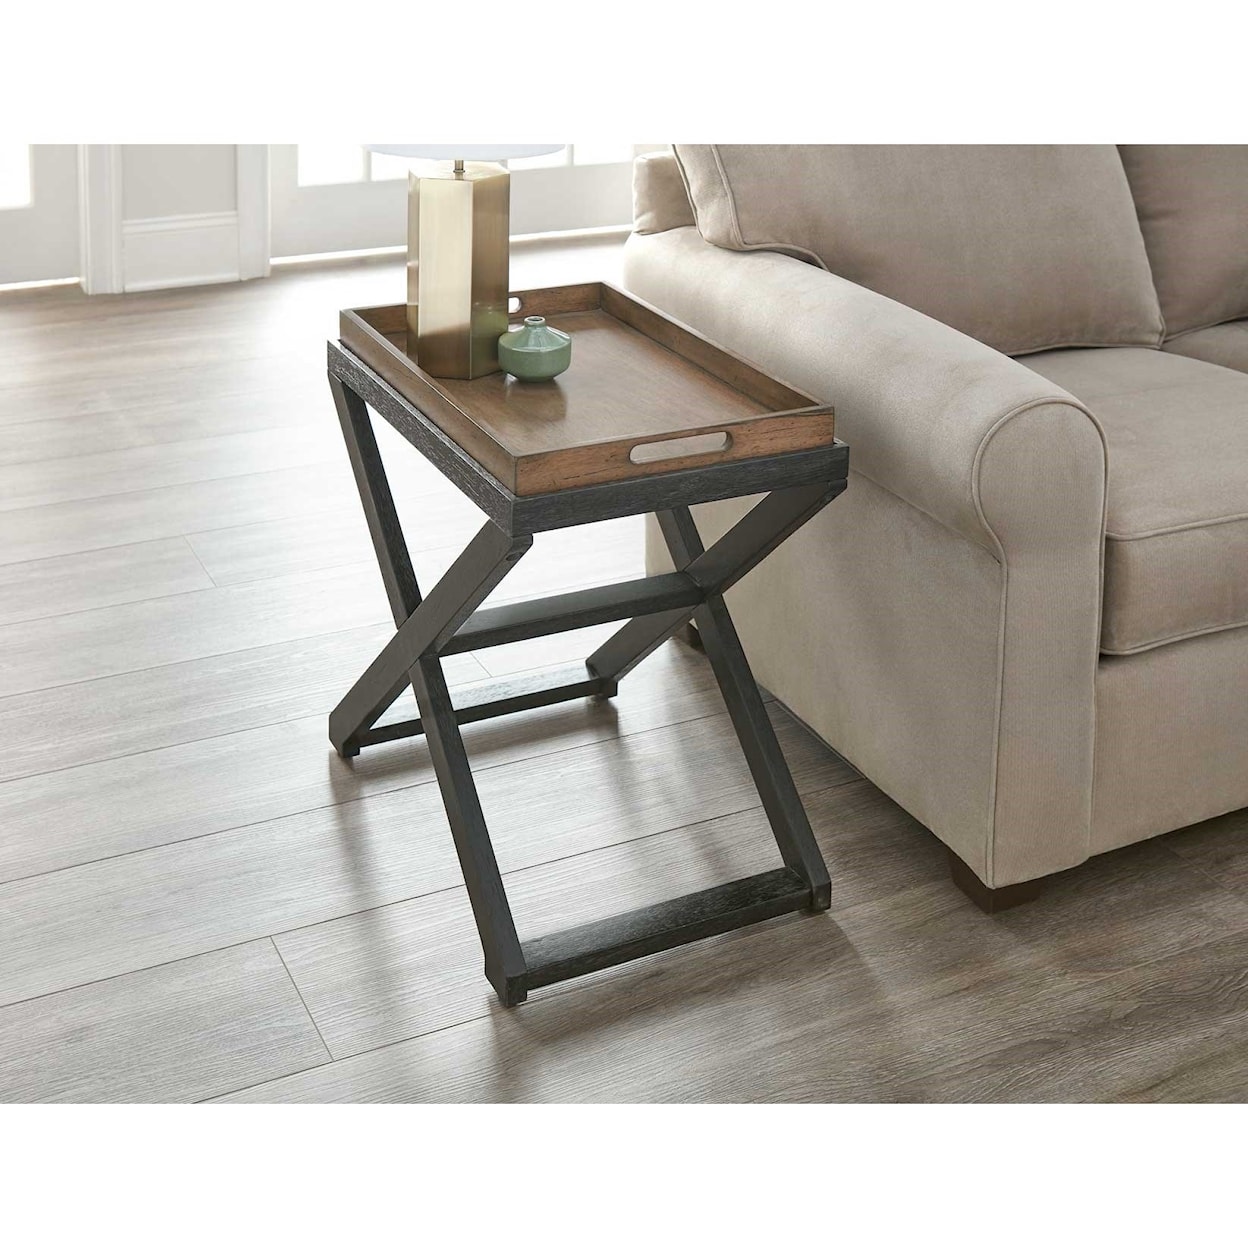 Prime Topeka Chairside Table